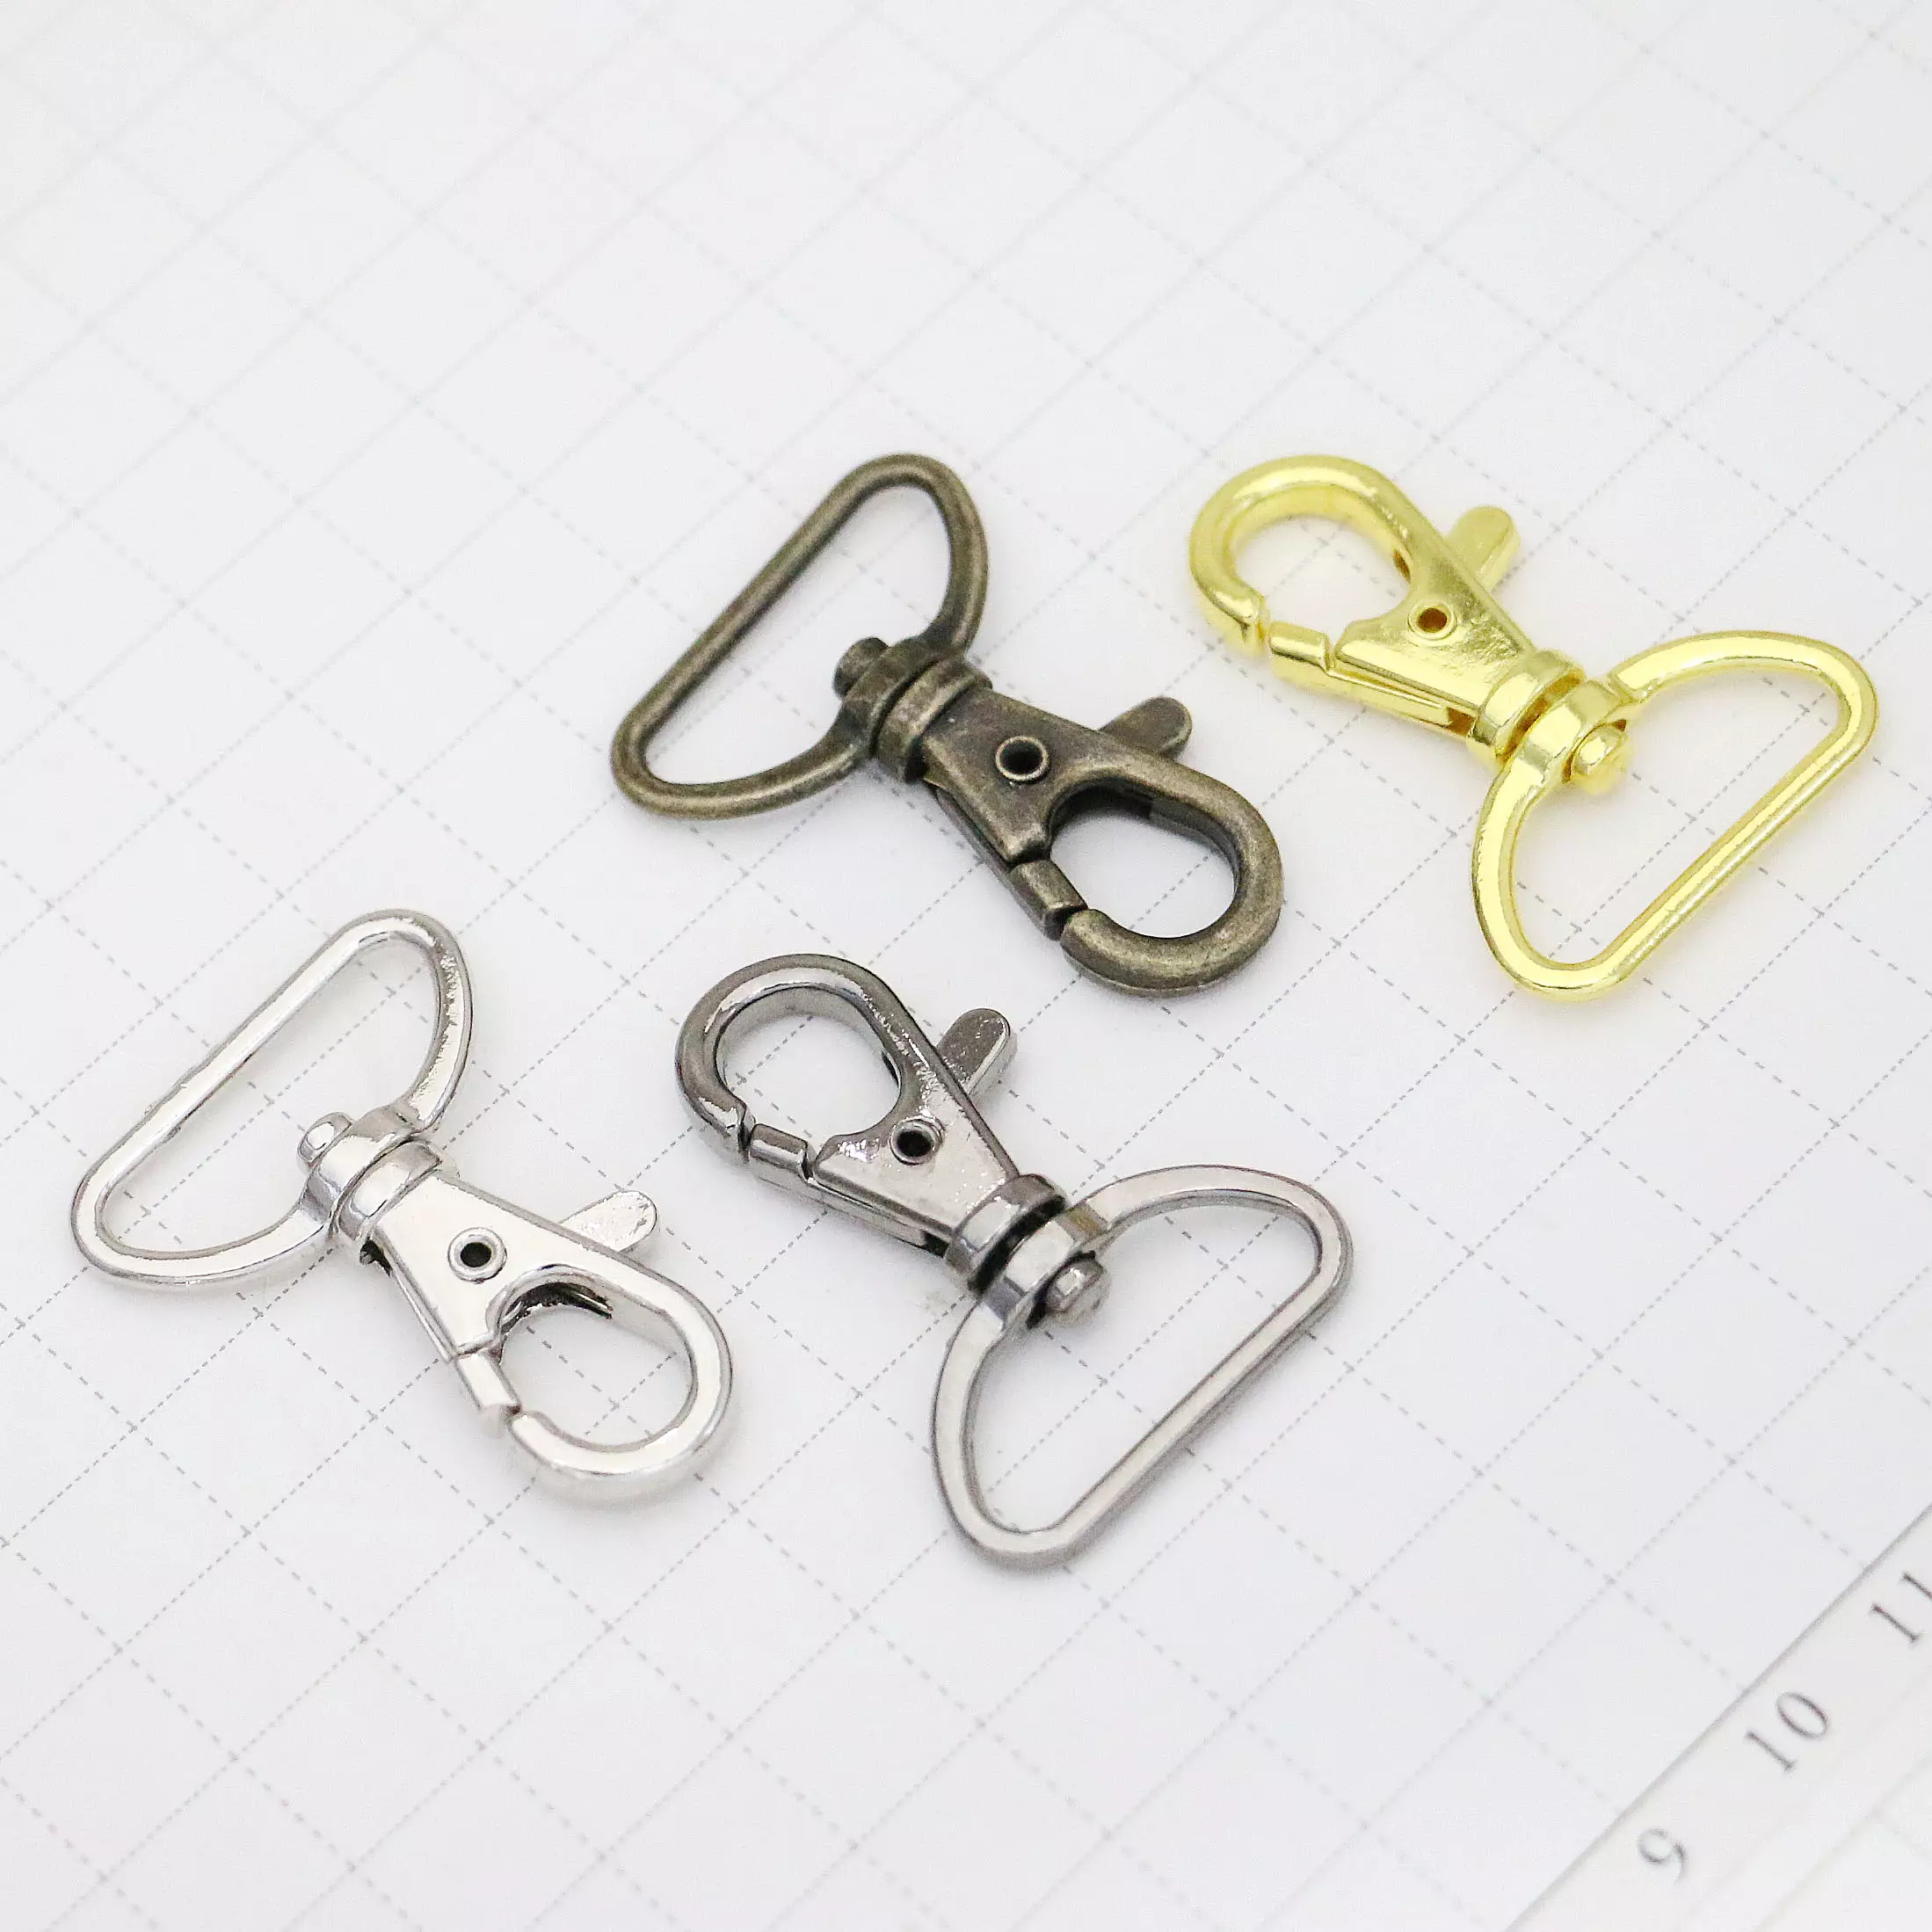 15mm HANDBAG HOOK FOR LUGGAGE TAG SILVER LOBSTER CLASP suit Louis Vuitton LV